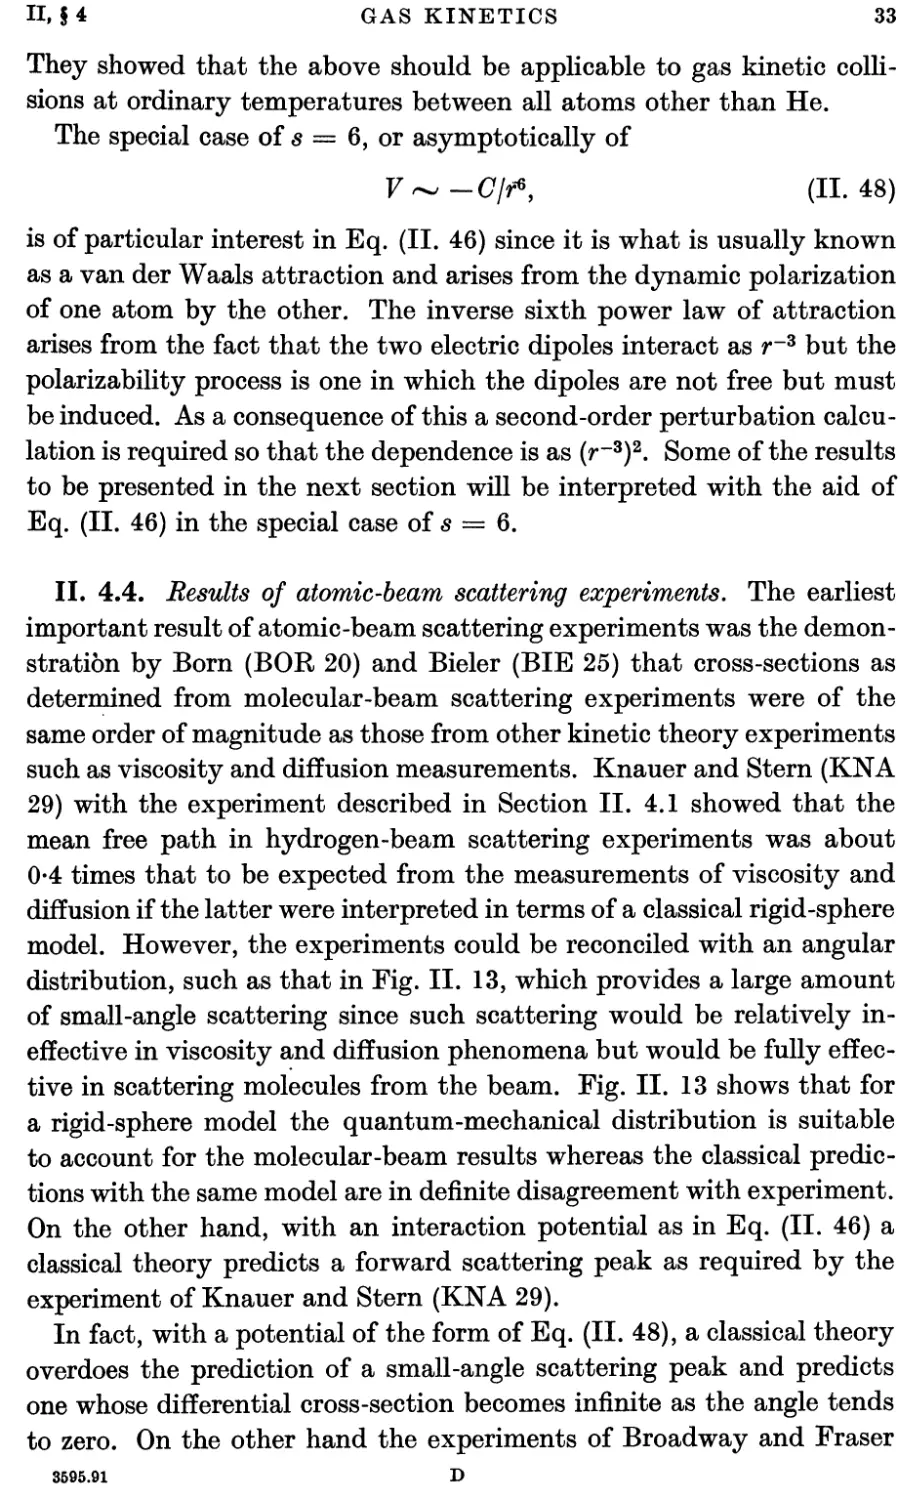 II.4.4. Results of atomic-beam scattering experiments